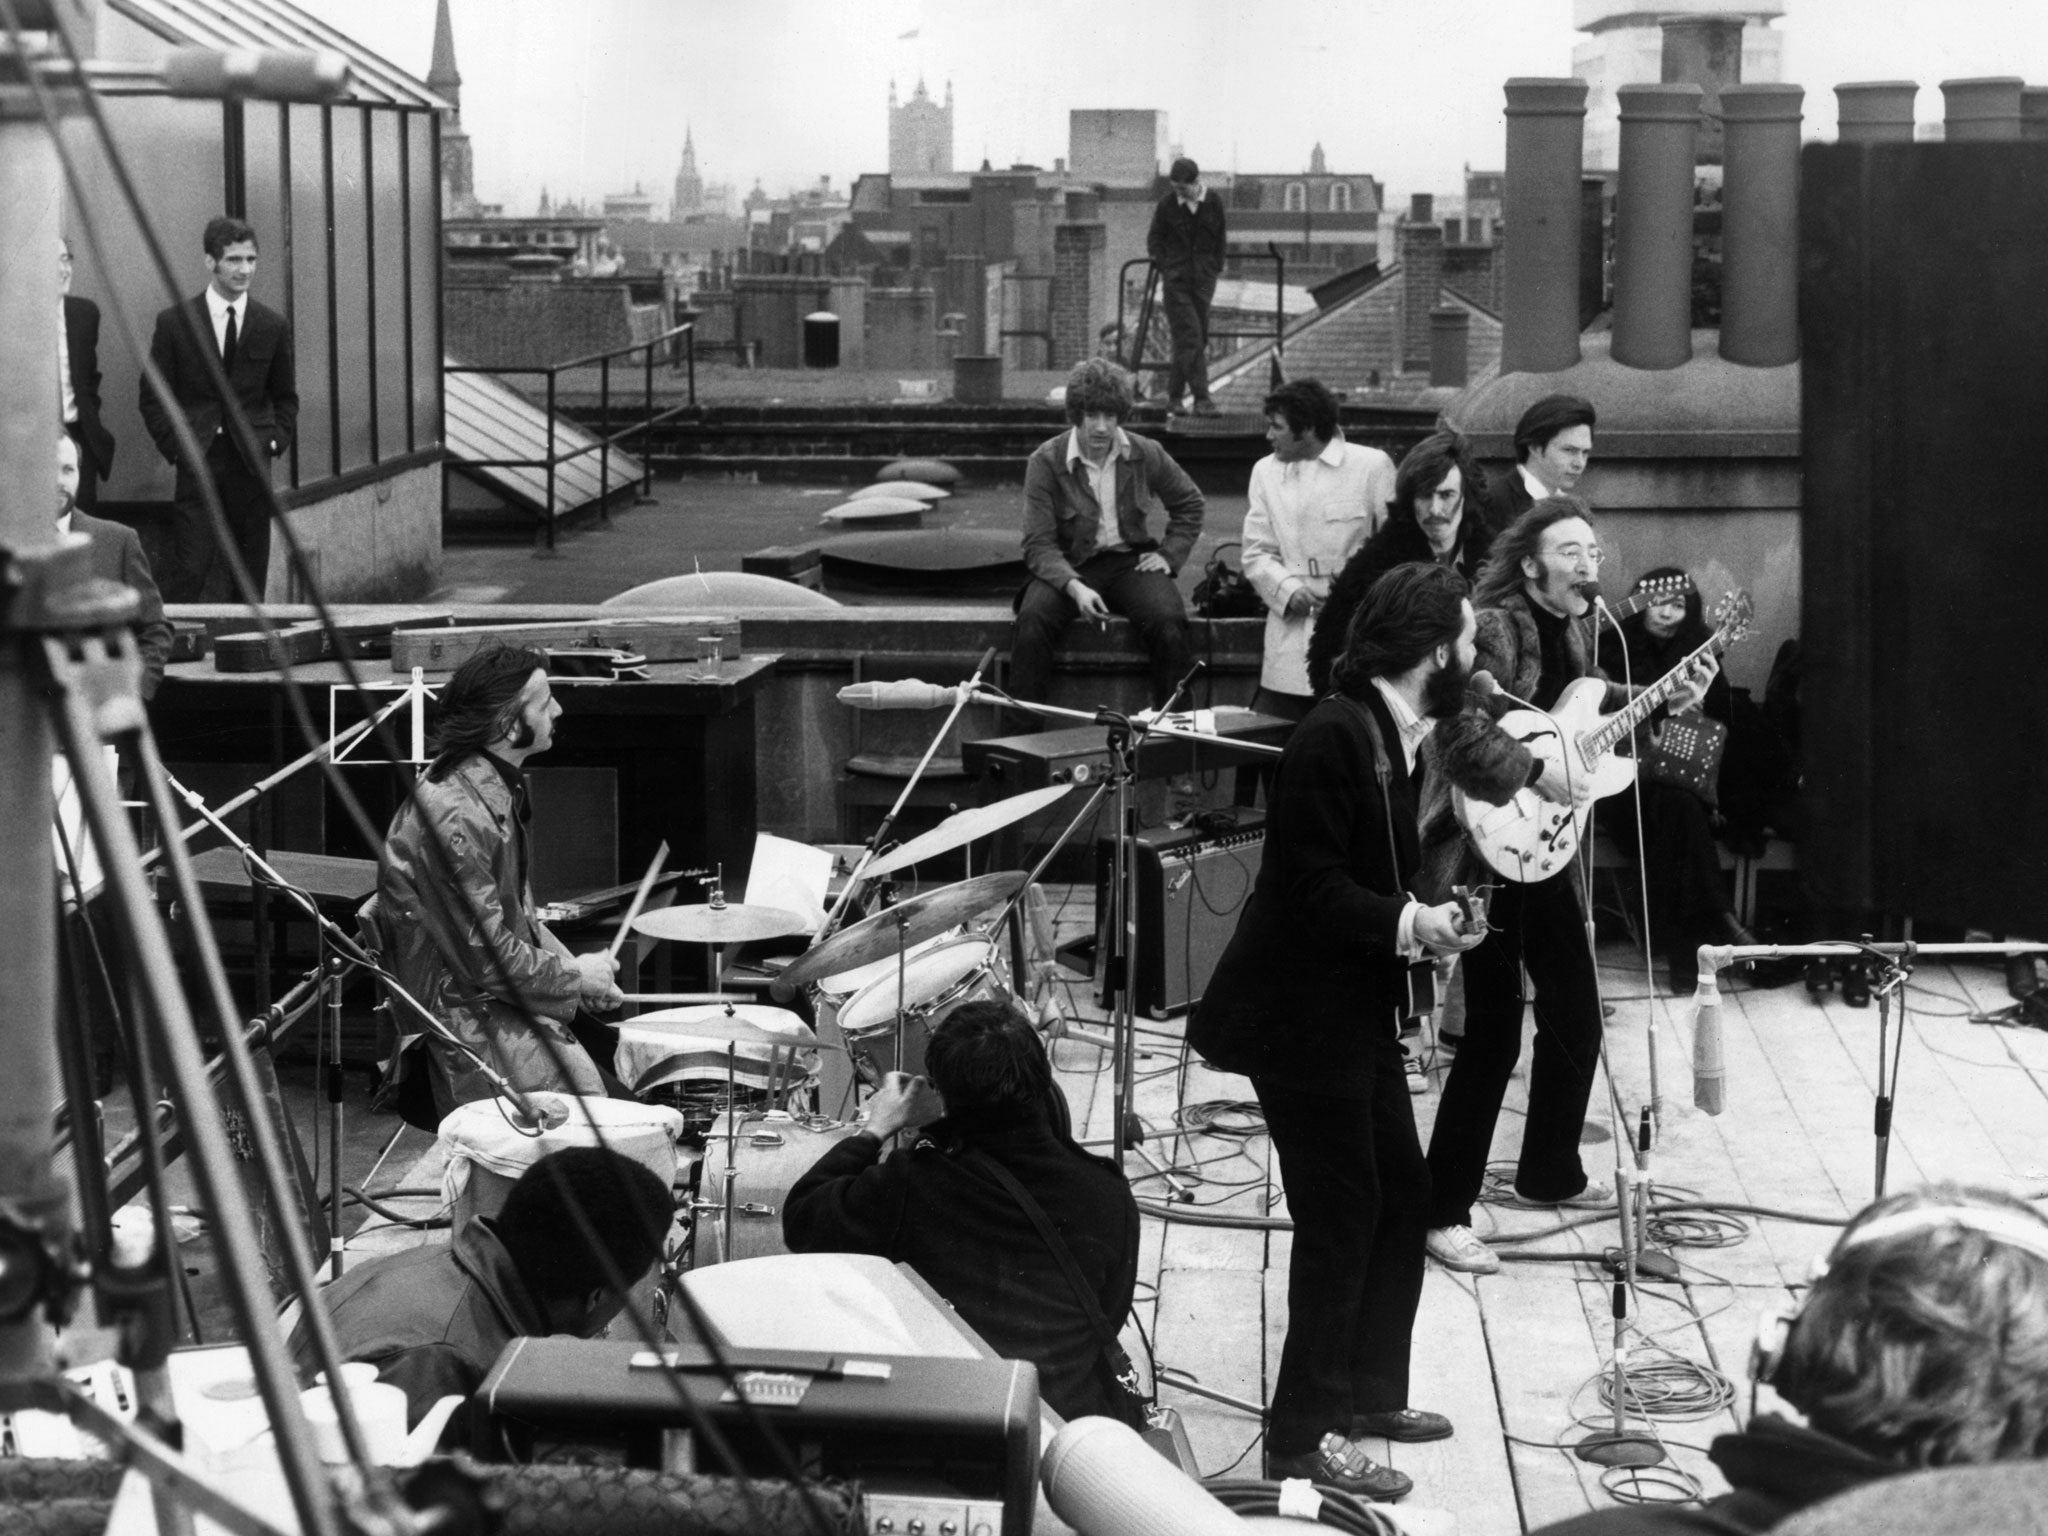 Let it be: The Beatles on the roof of the Apple Corps building in 1969